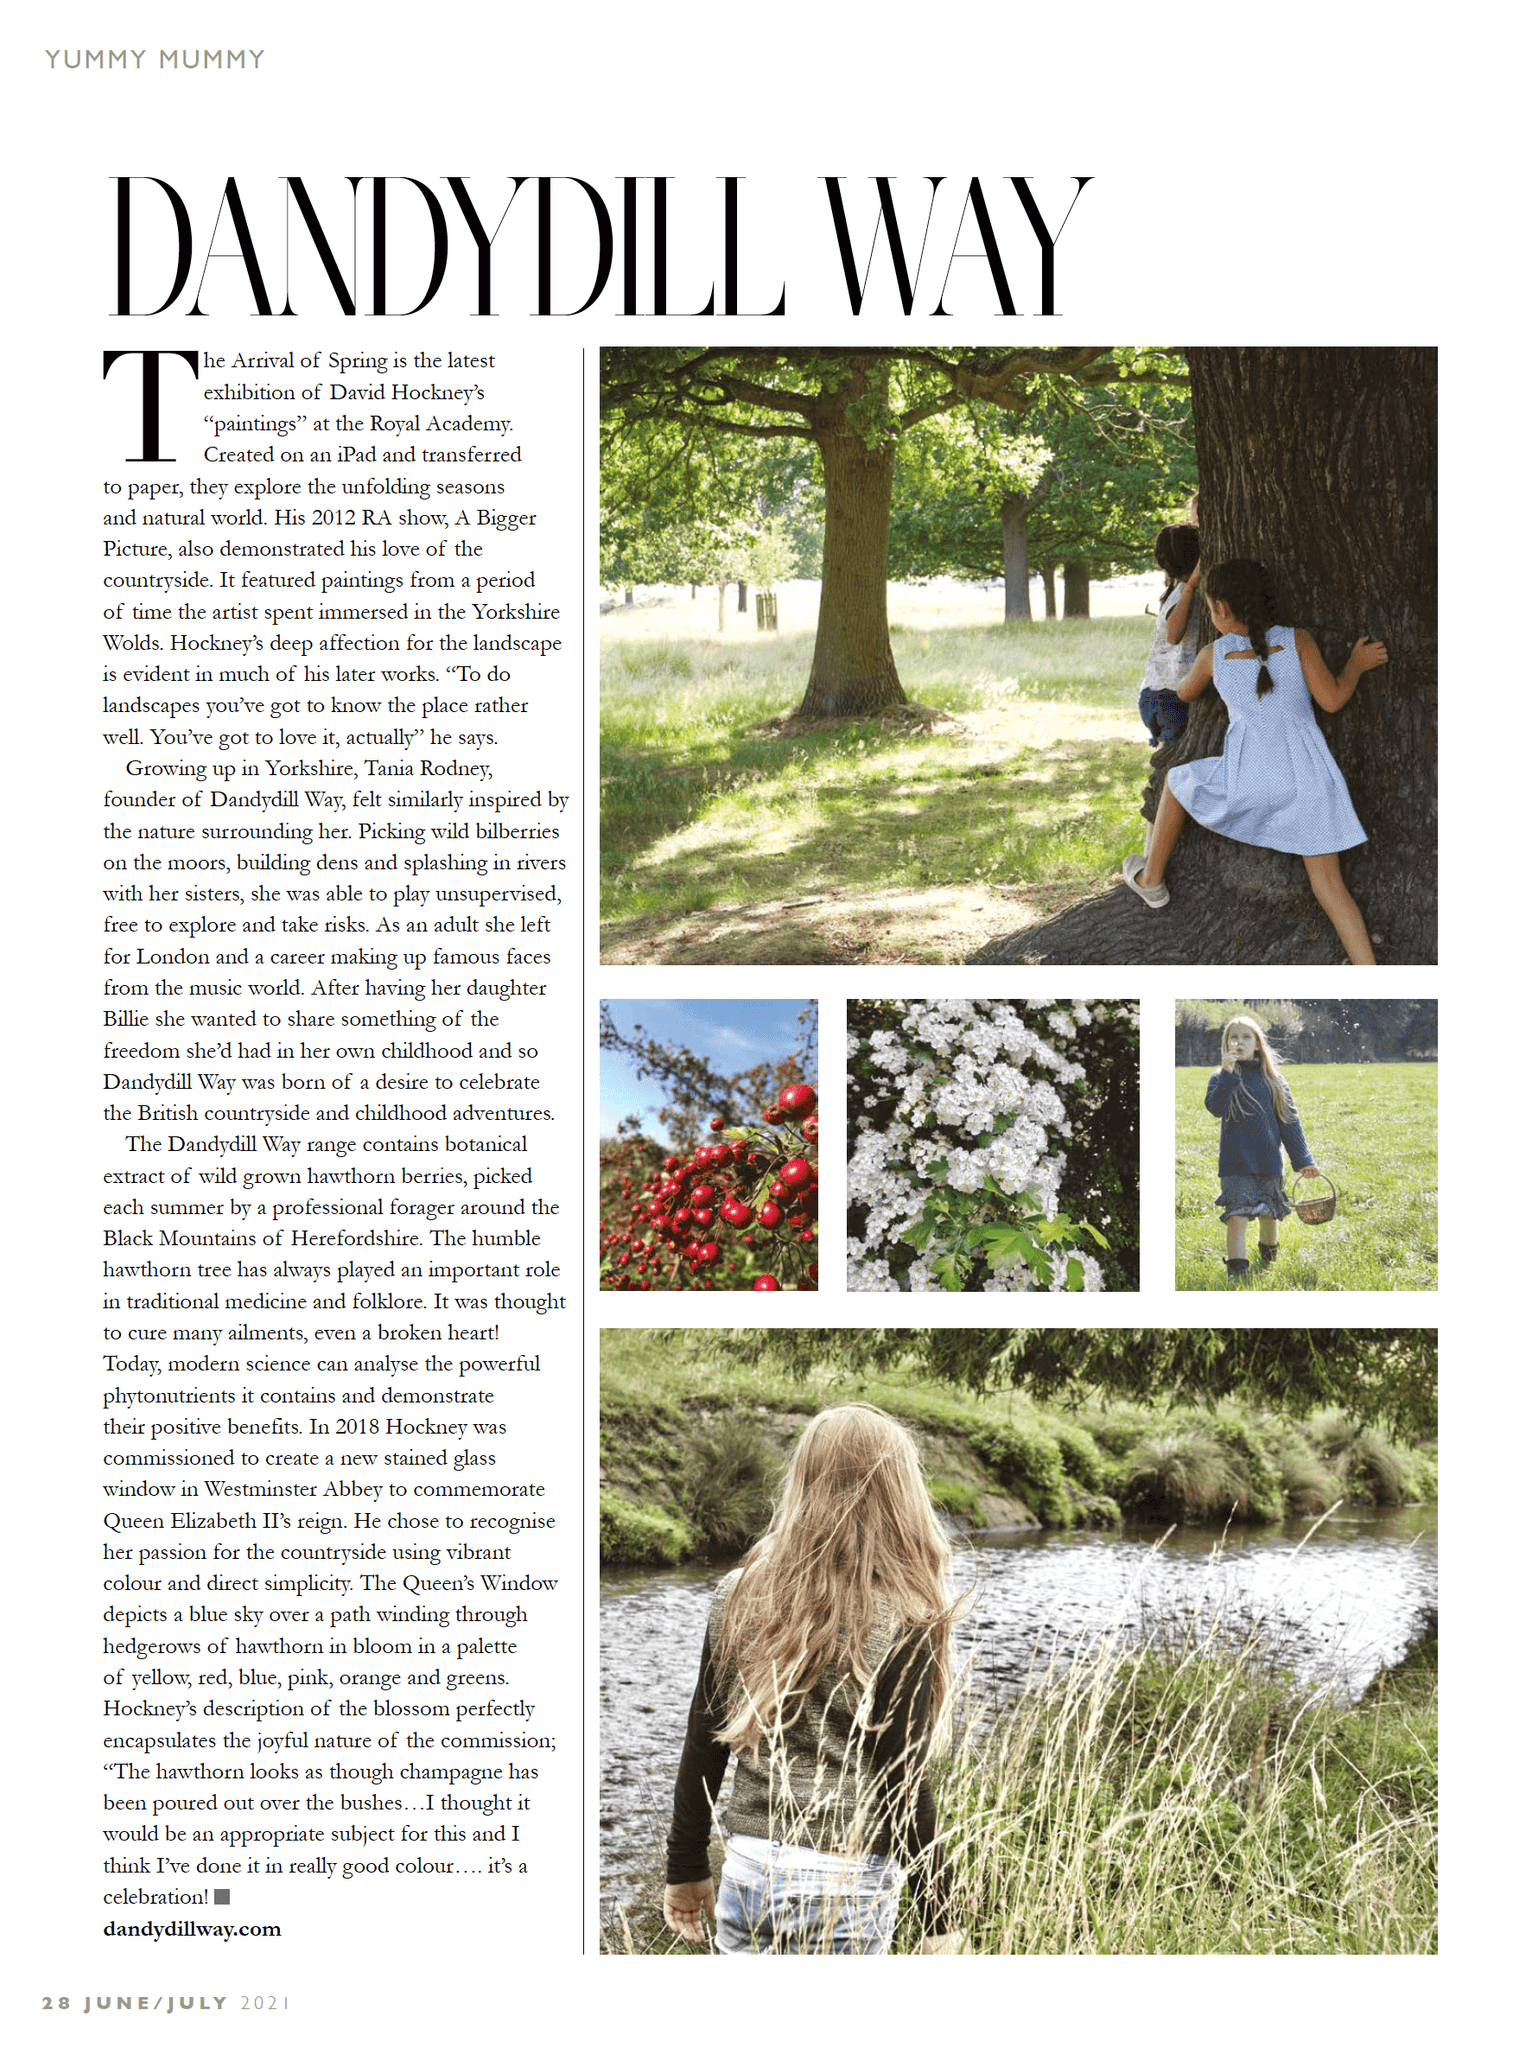 Dandydill Way and David Hockney both celebrate the British countryside and hawthorn 